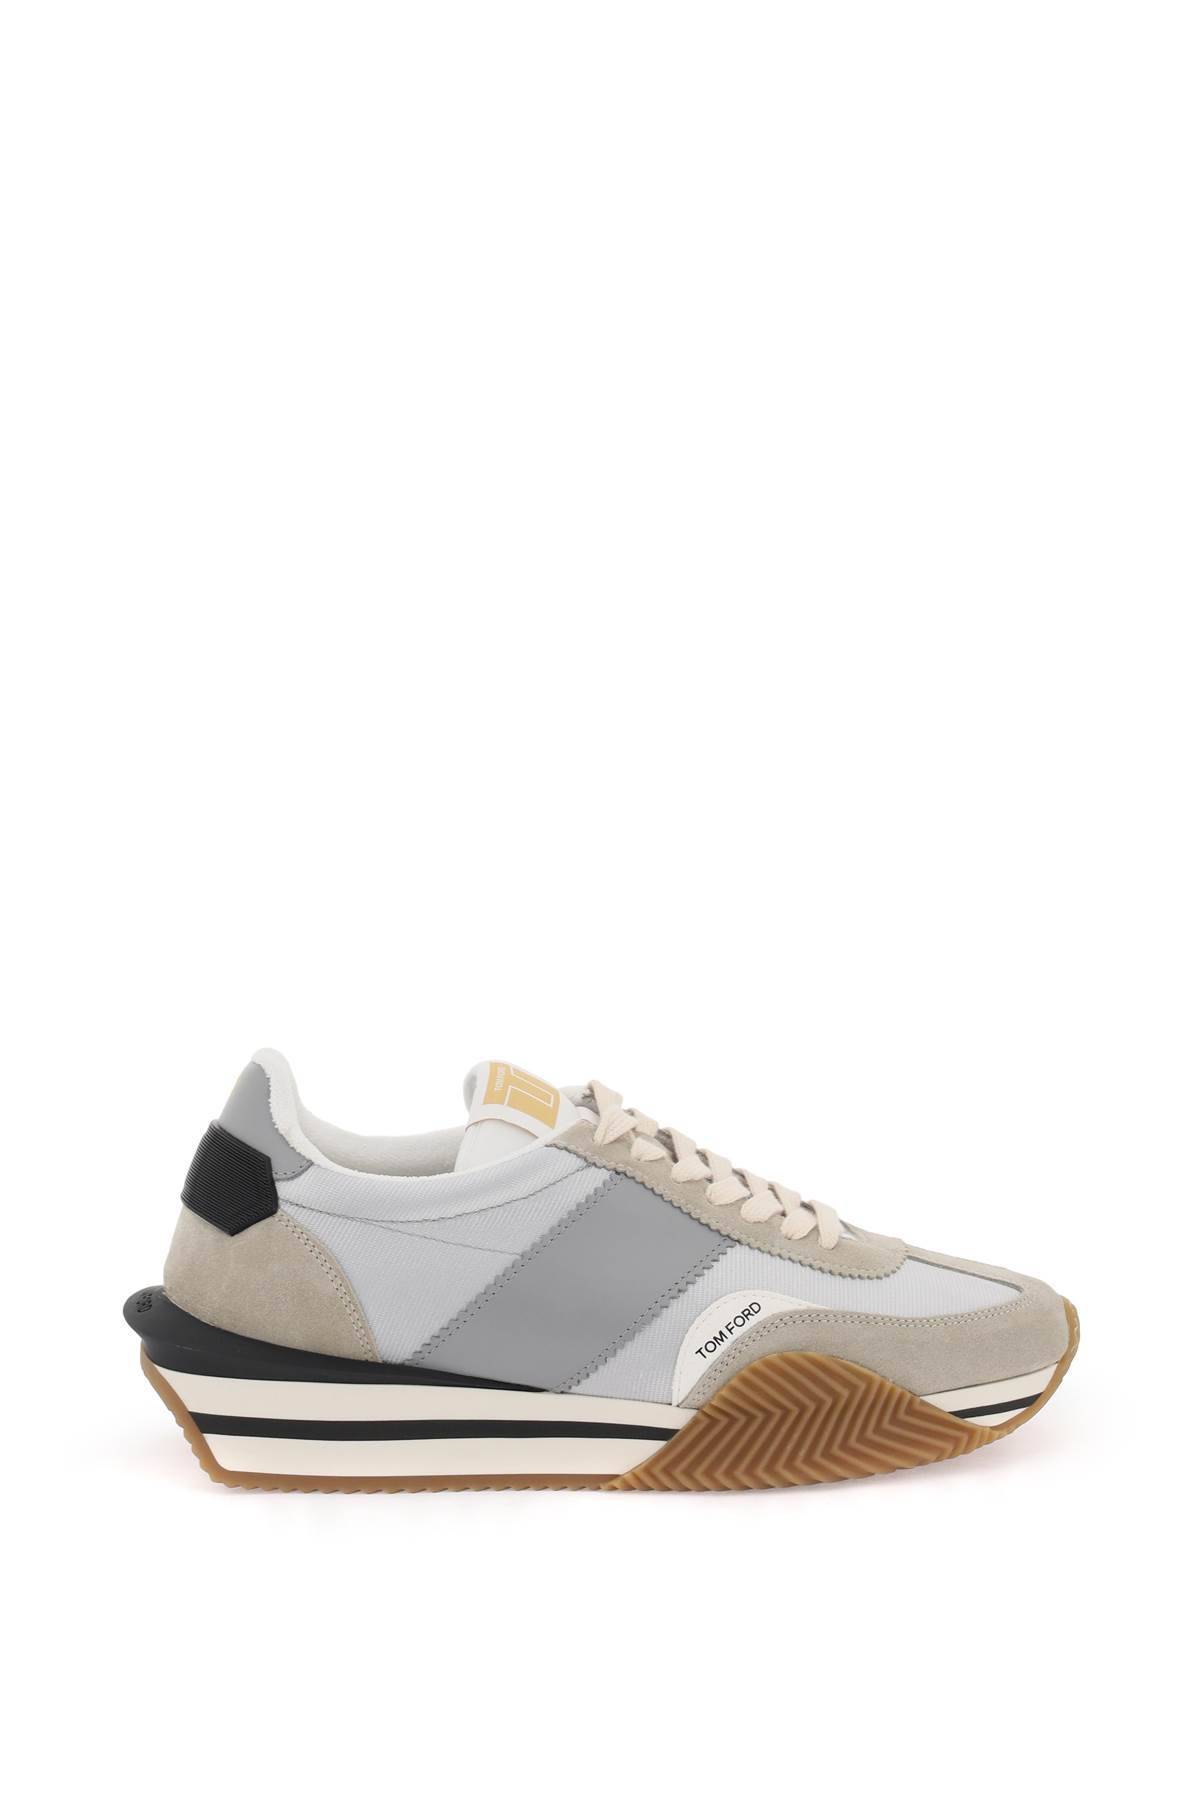 Tom Ford TOM FORD james sneakers in lycra and suede leather